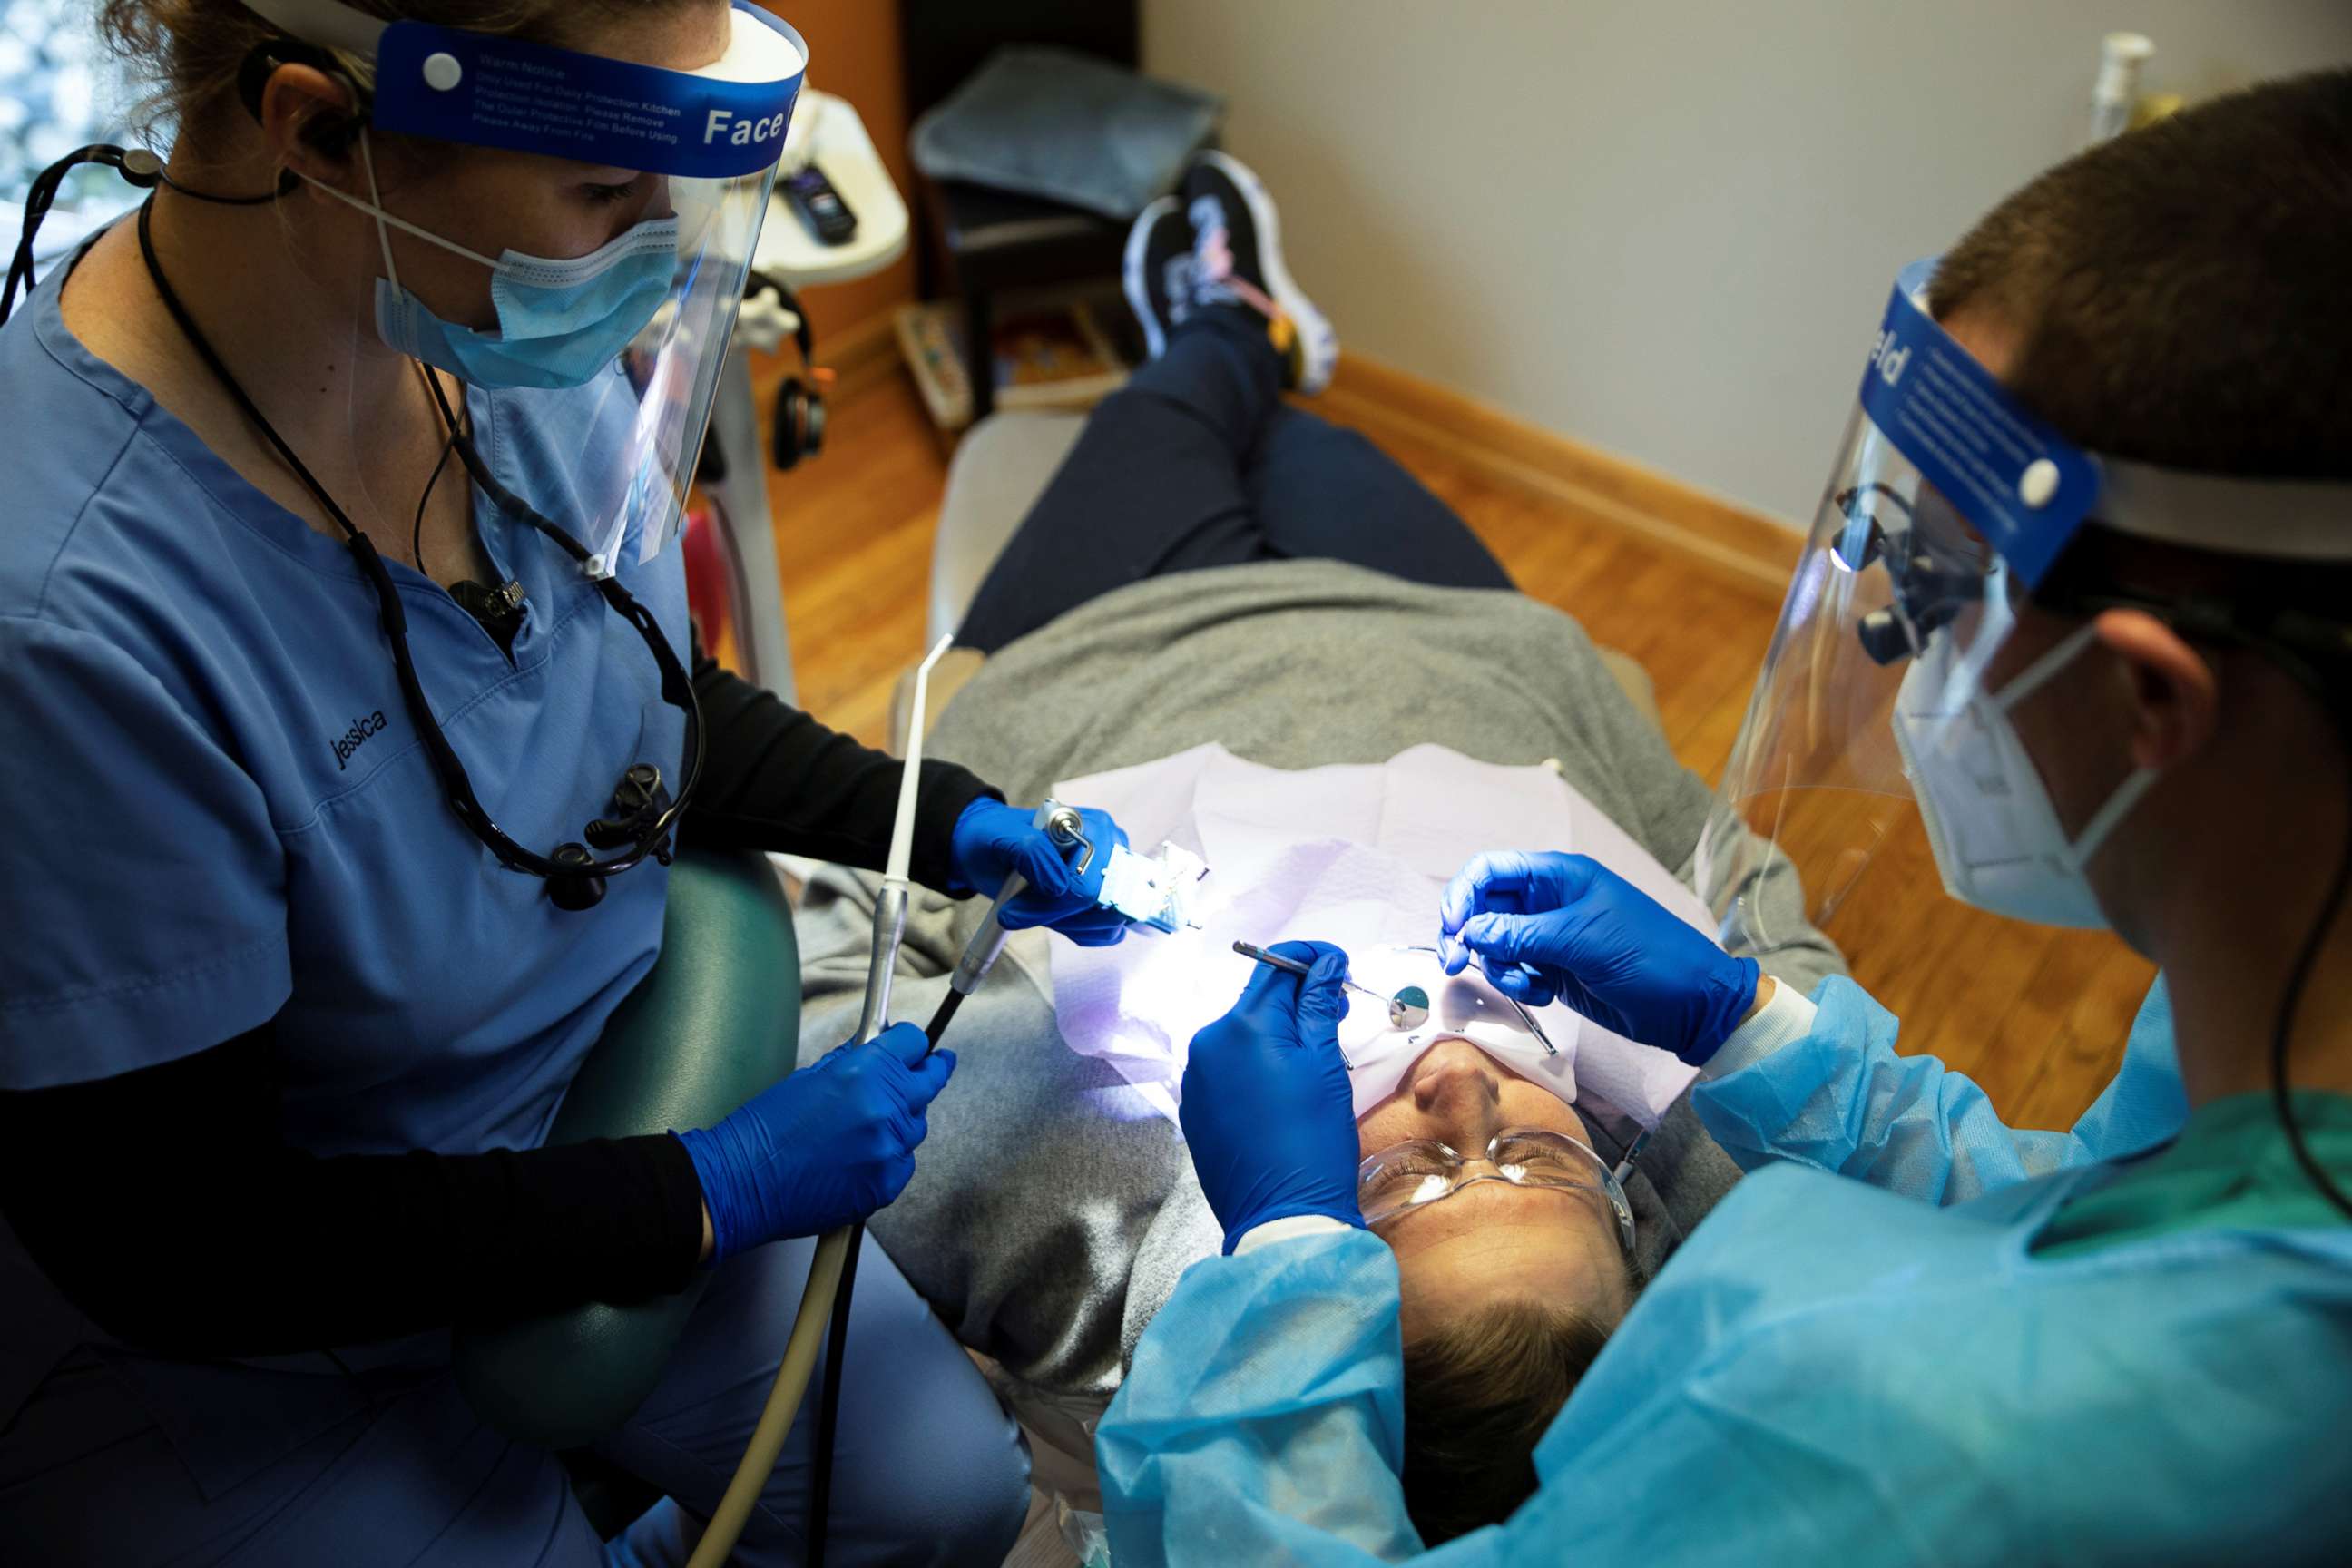 PHOTO: Dentists preform an oral procedure as Ohio implements phase one of reopening dentists, following the outbreak of the coronavirus disease (COVID-19), in Columbus, May 1, 2020. 